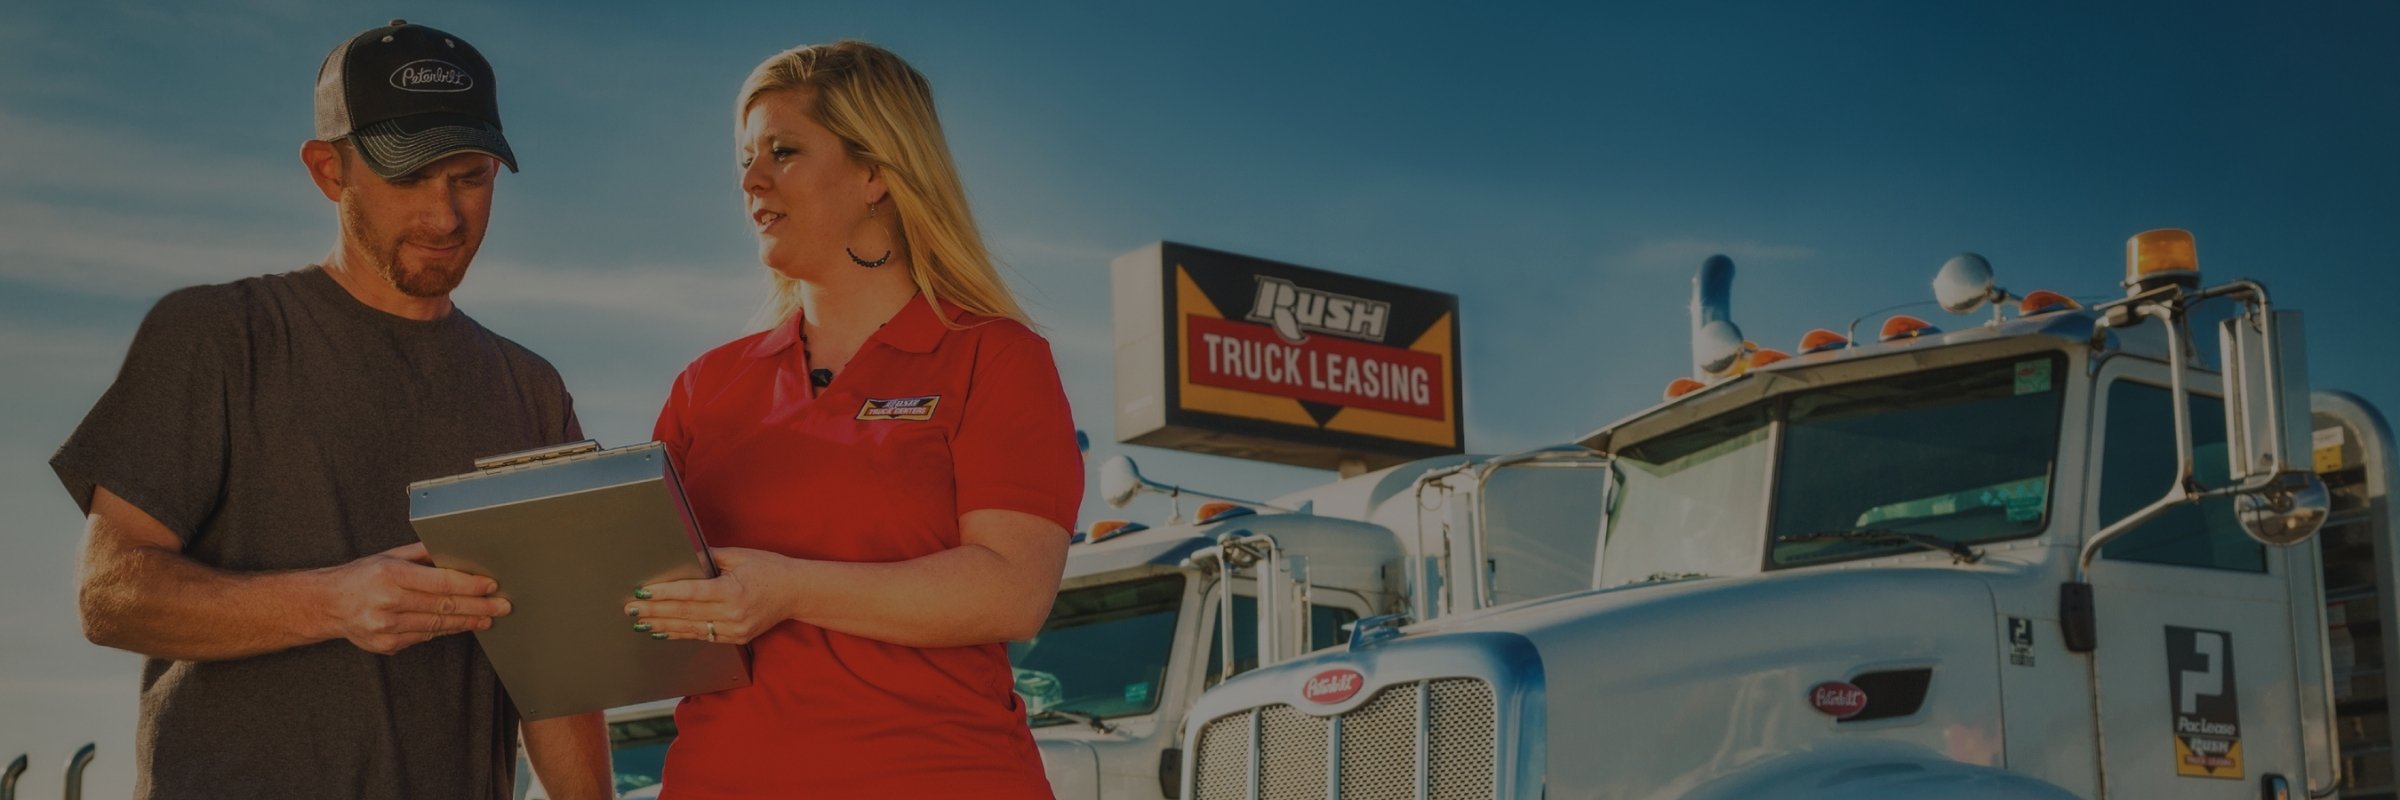 Rush Truck Leasing employee with customer in front of trucks and store sign